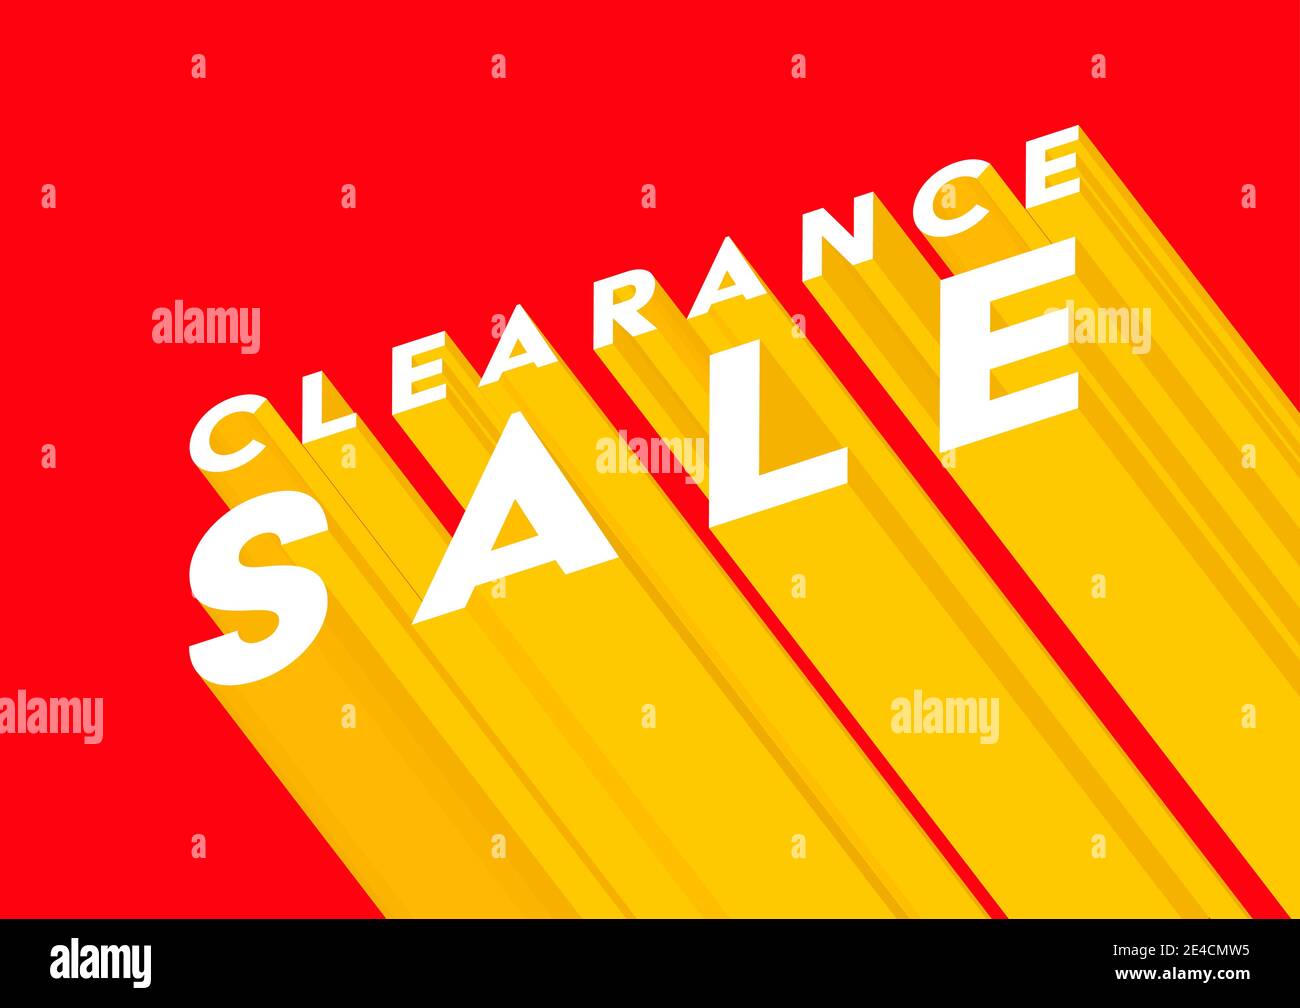 Clearance sale poster or flyer design. Clearance online sale